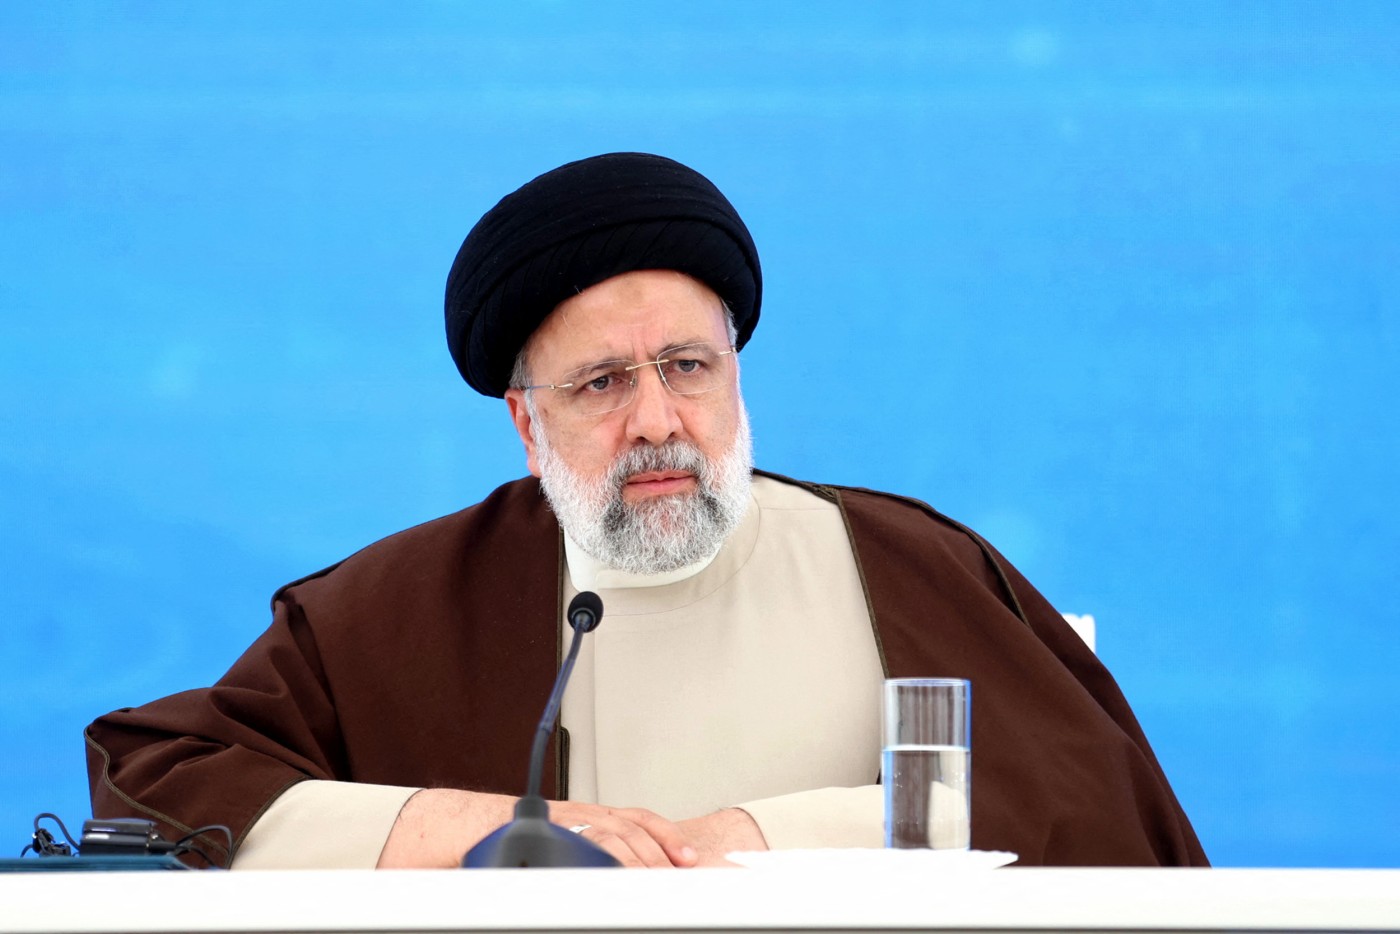 Fate of Iranian President uncertain after helicopter crash